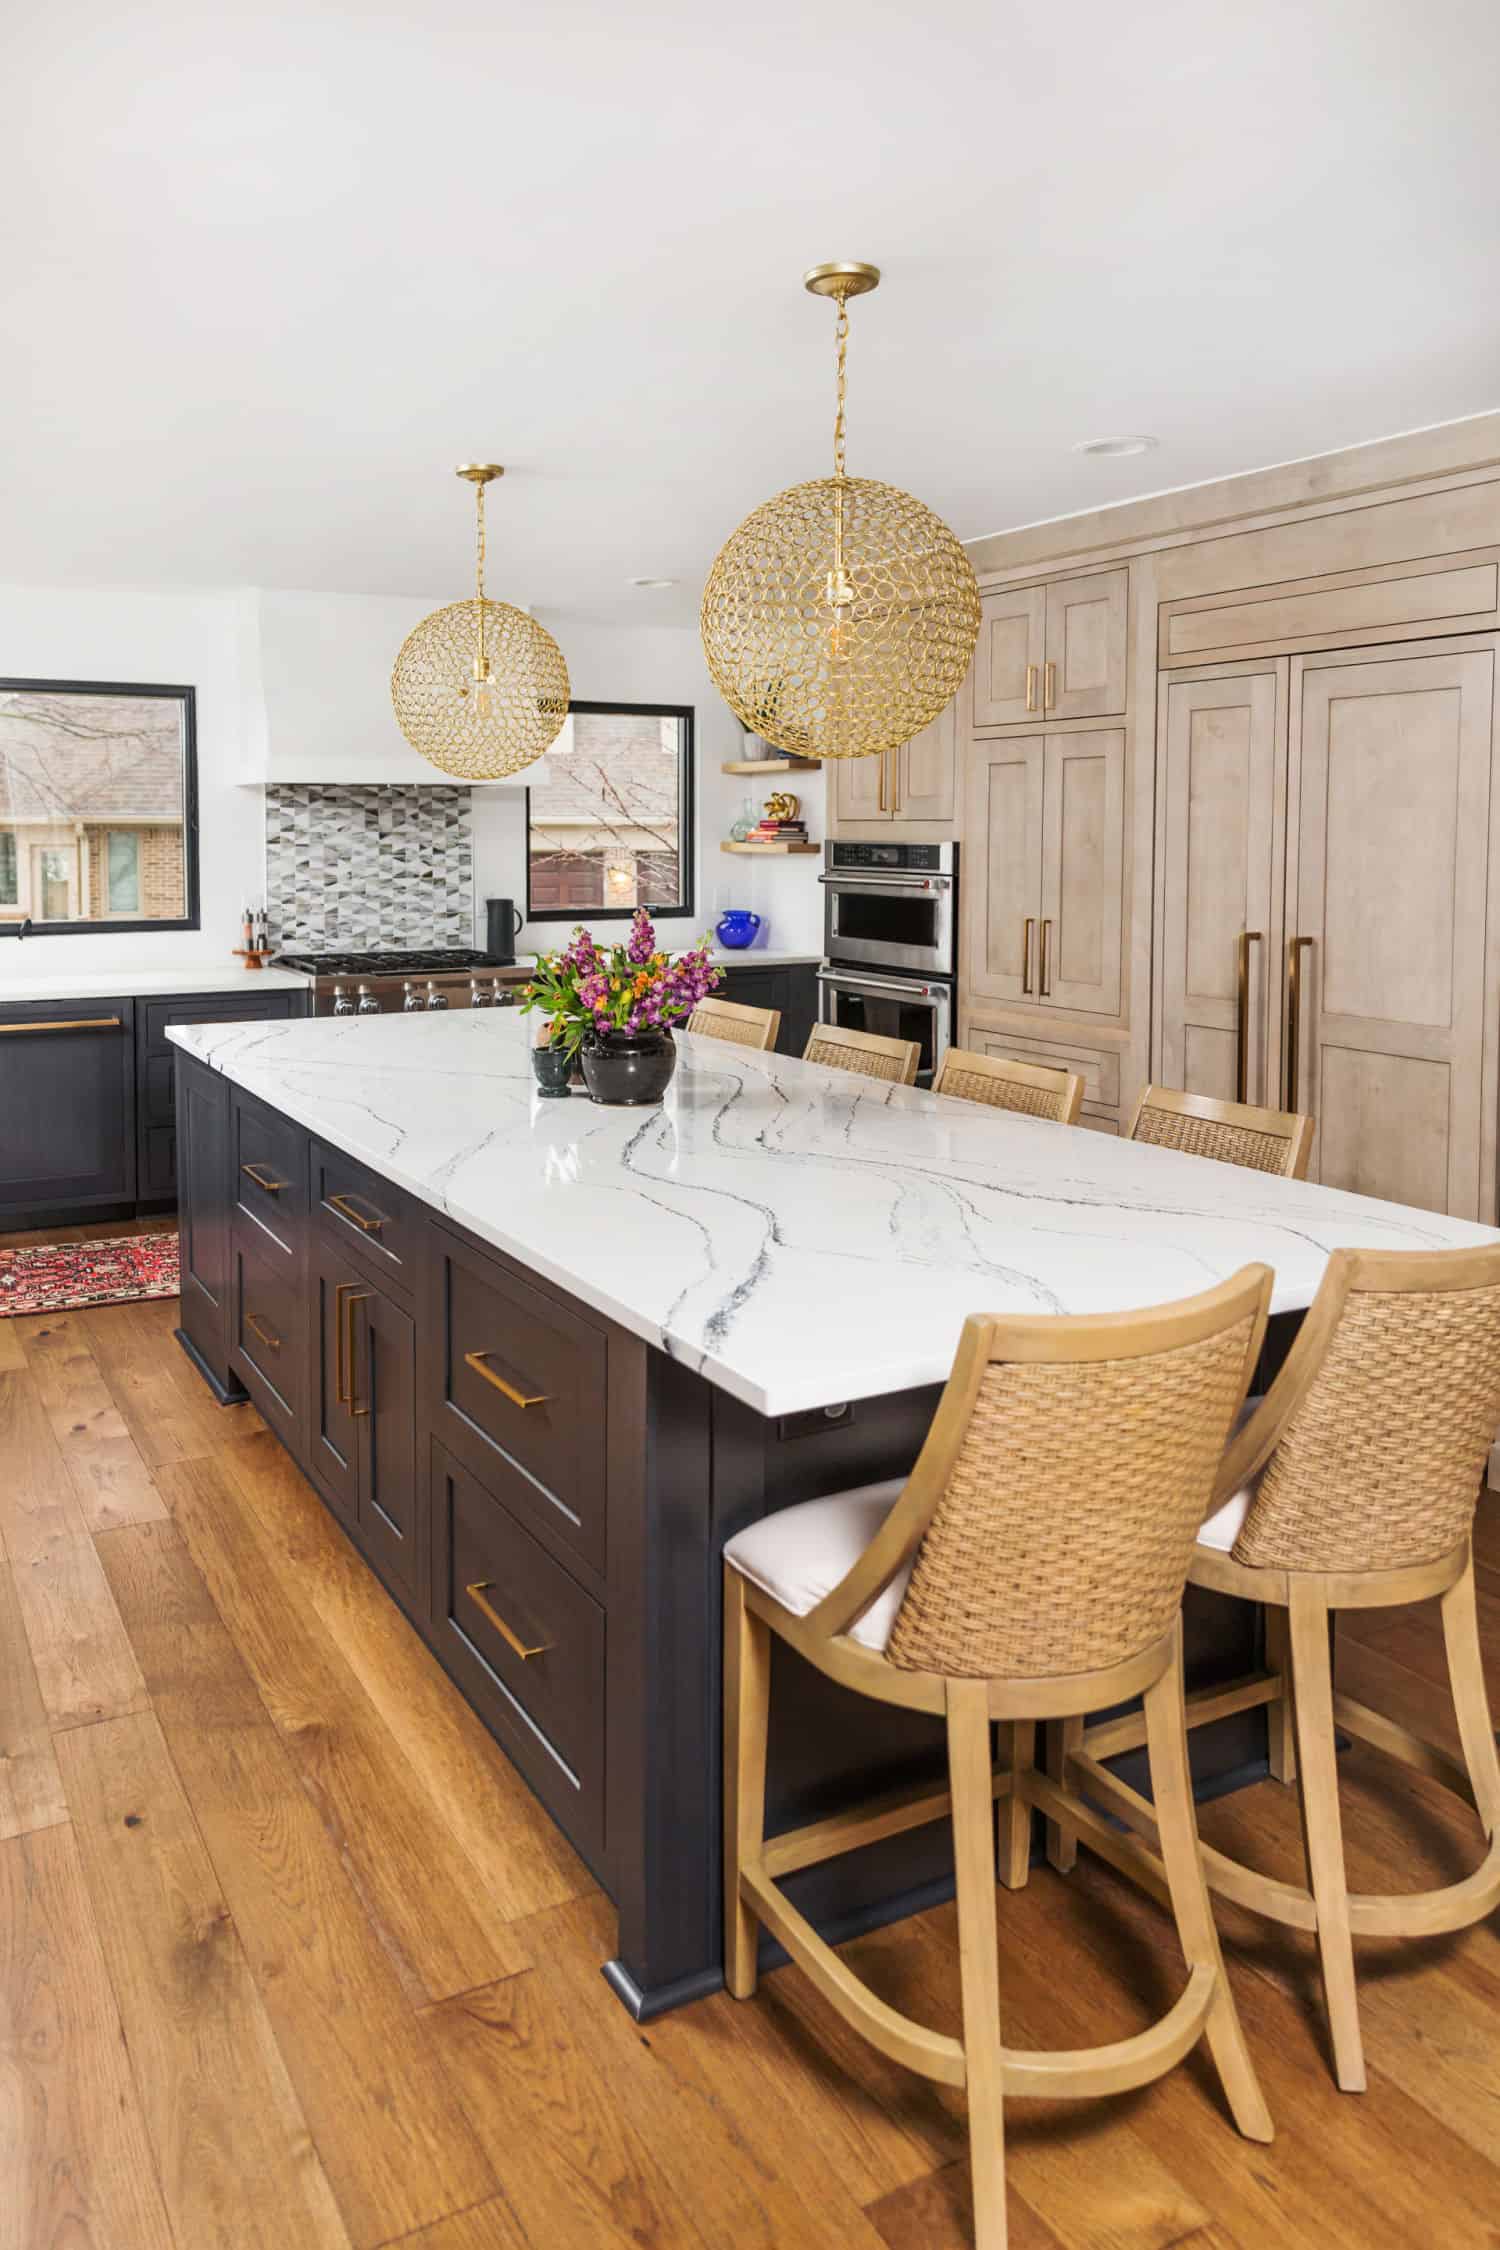 Nicholas Design Build | A remodeled kitchen with a marble island and wooden floors.